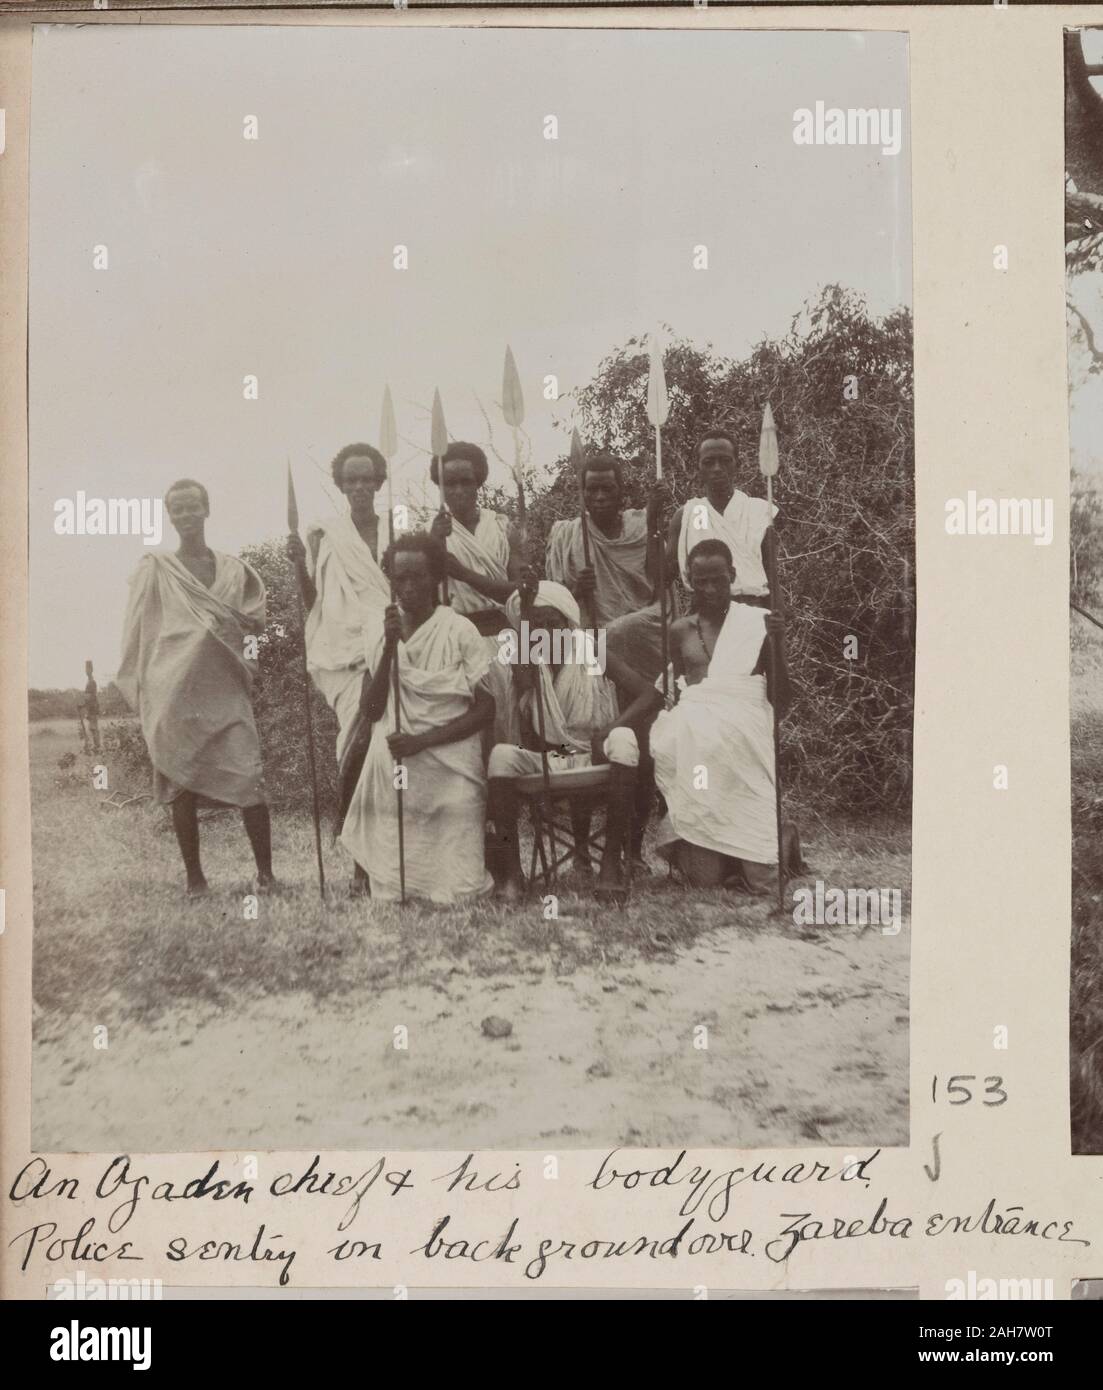 SomaliaJubaland, A group of men armed with spears surround a seated elder. A distant policeman can be seen in the background.Original manuscript caption: An Ogaden chief & his bodyguard. Police sentry in background over Zareba entrance, circa 1910. 2005/078/1/153. Stock Photo